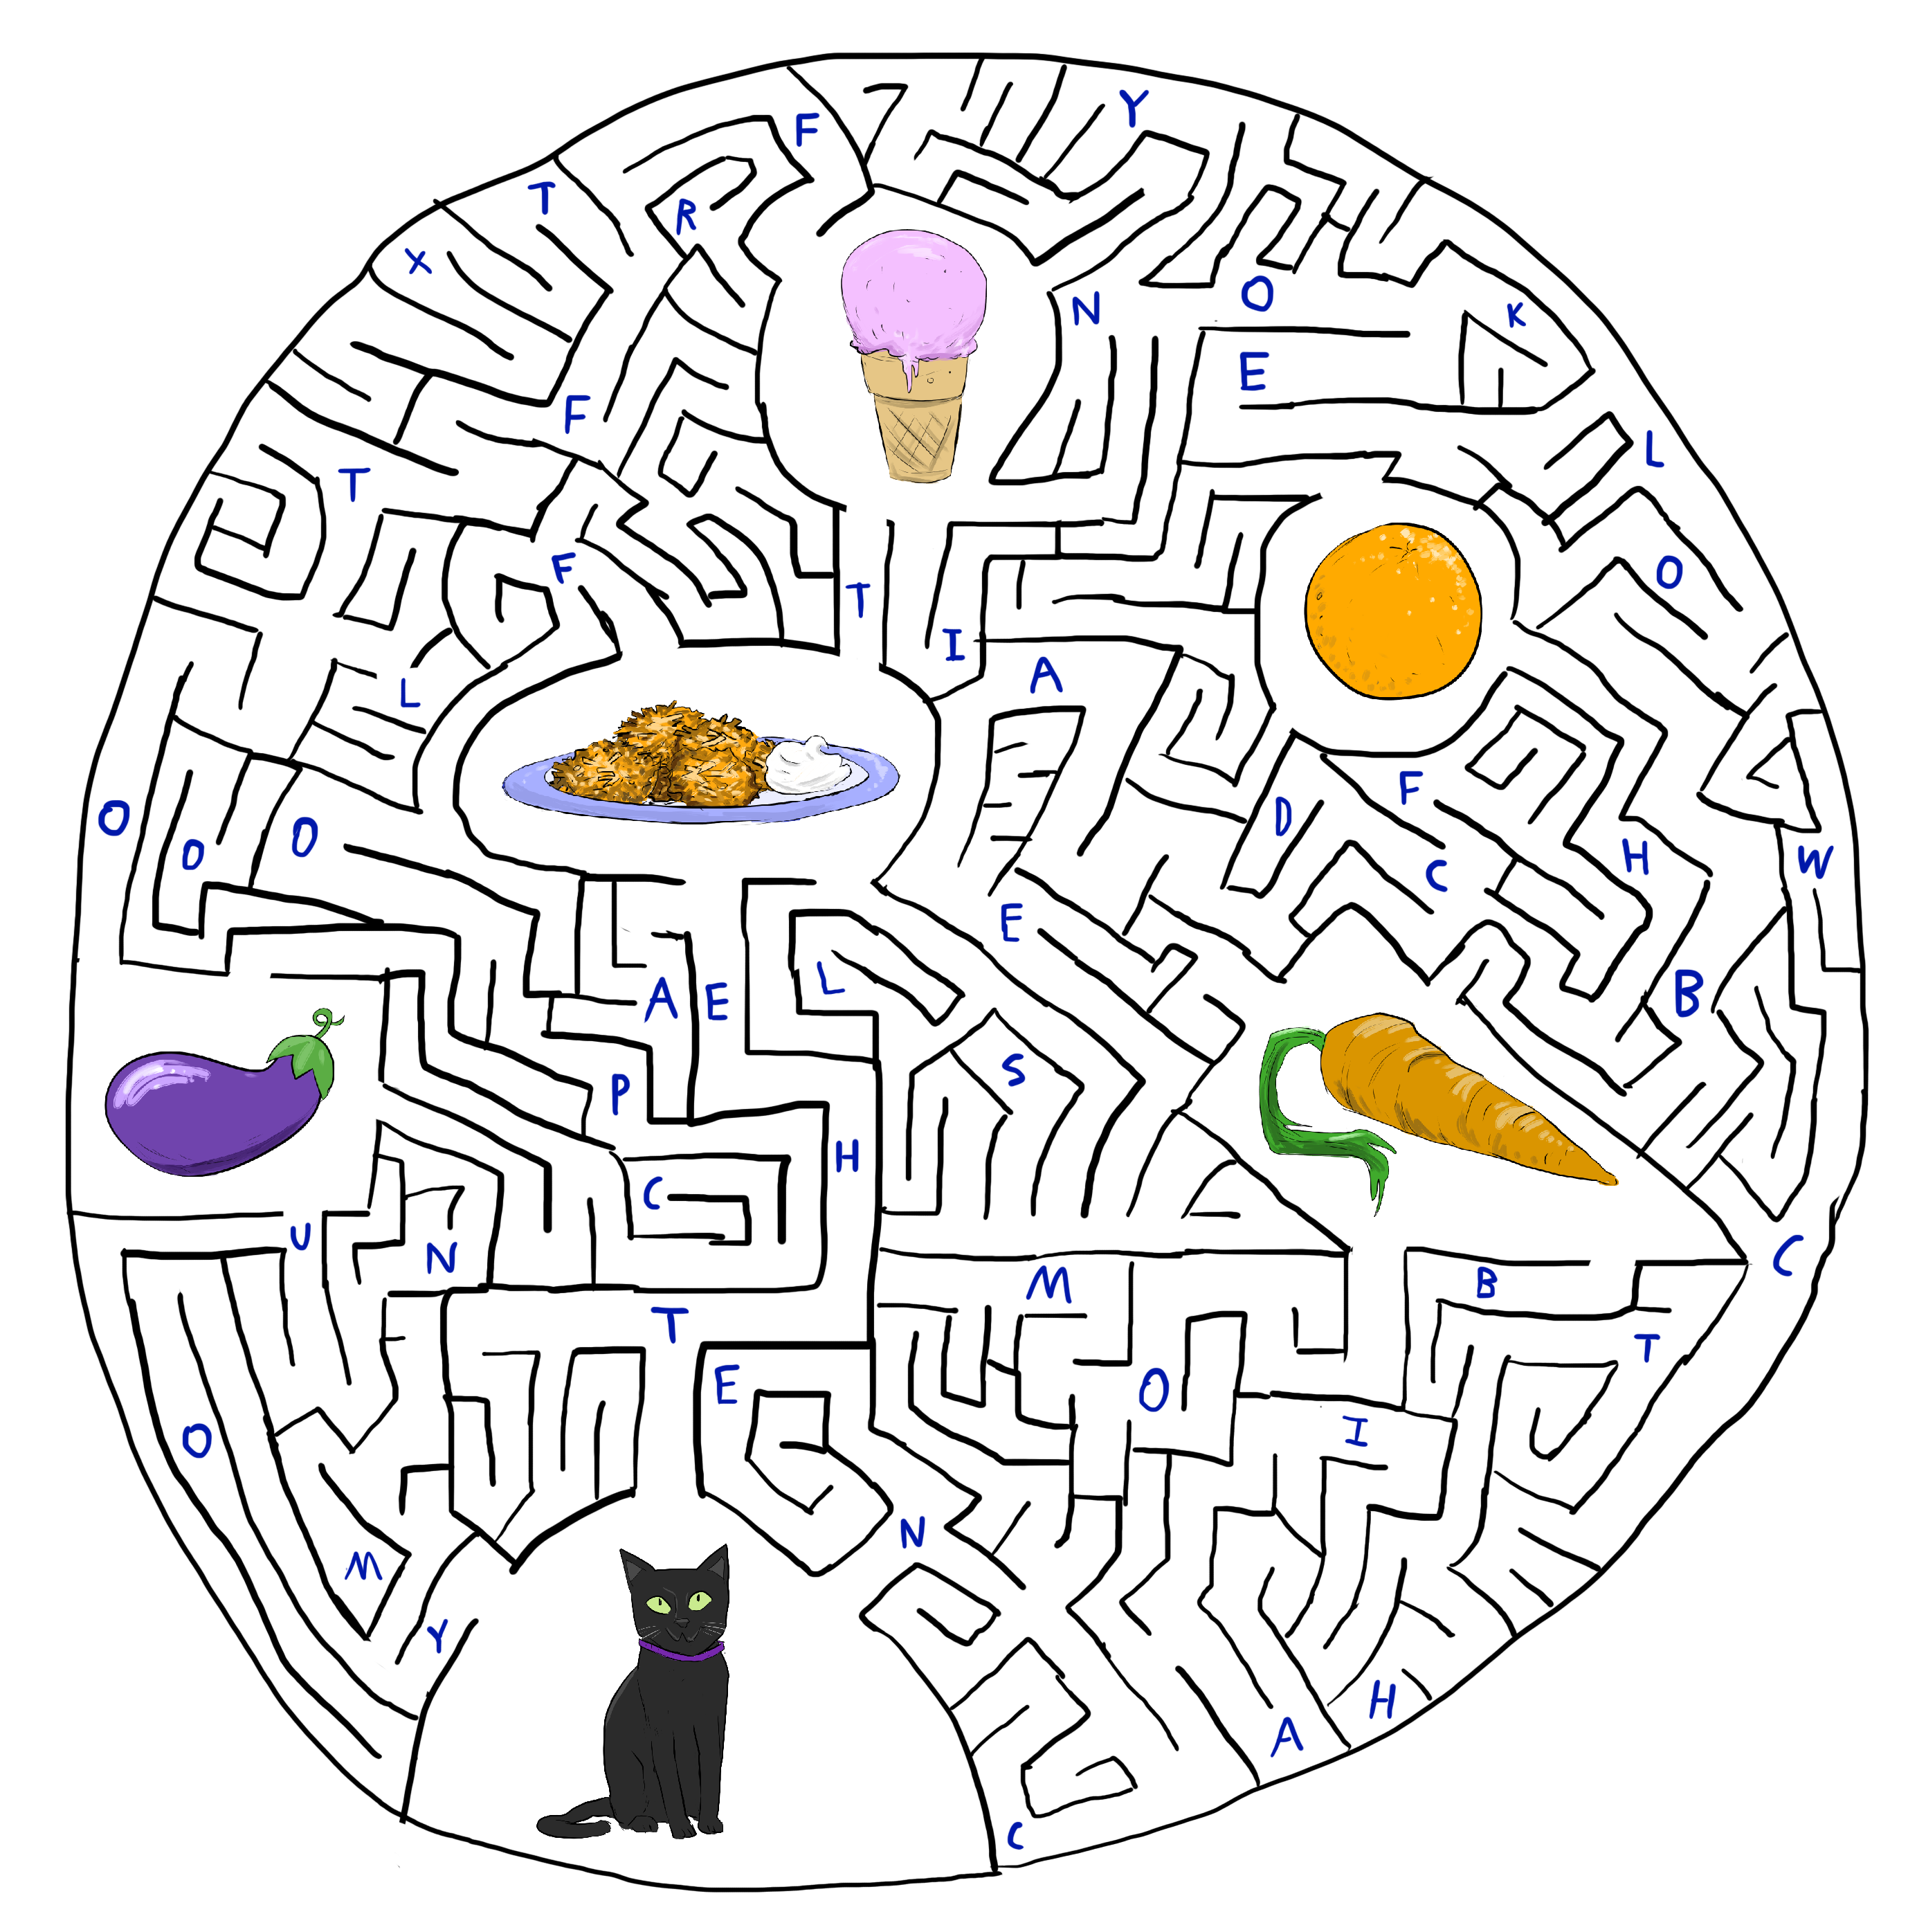 Duncan in a maze with food